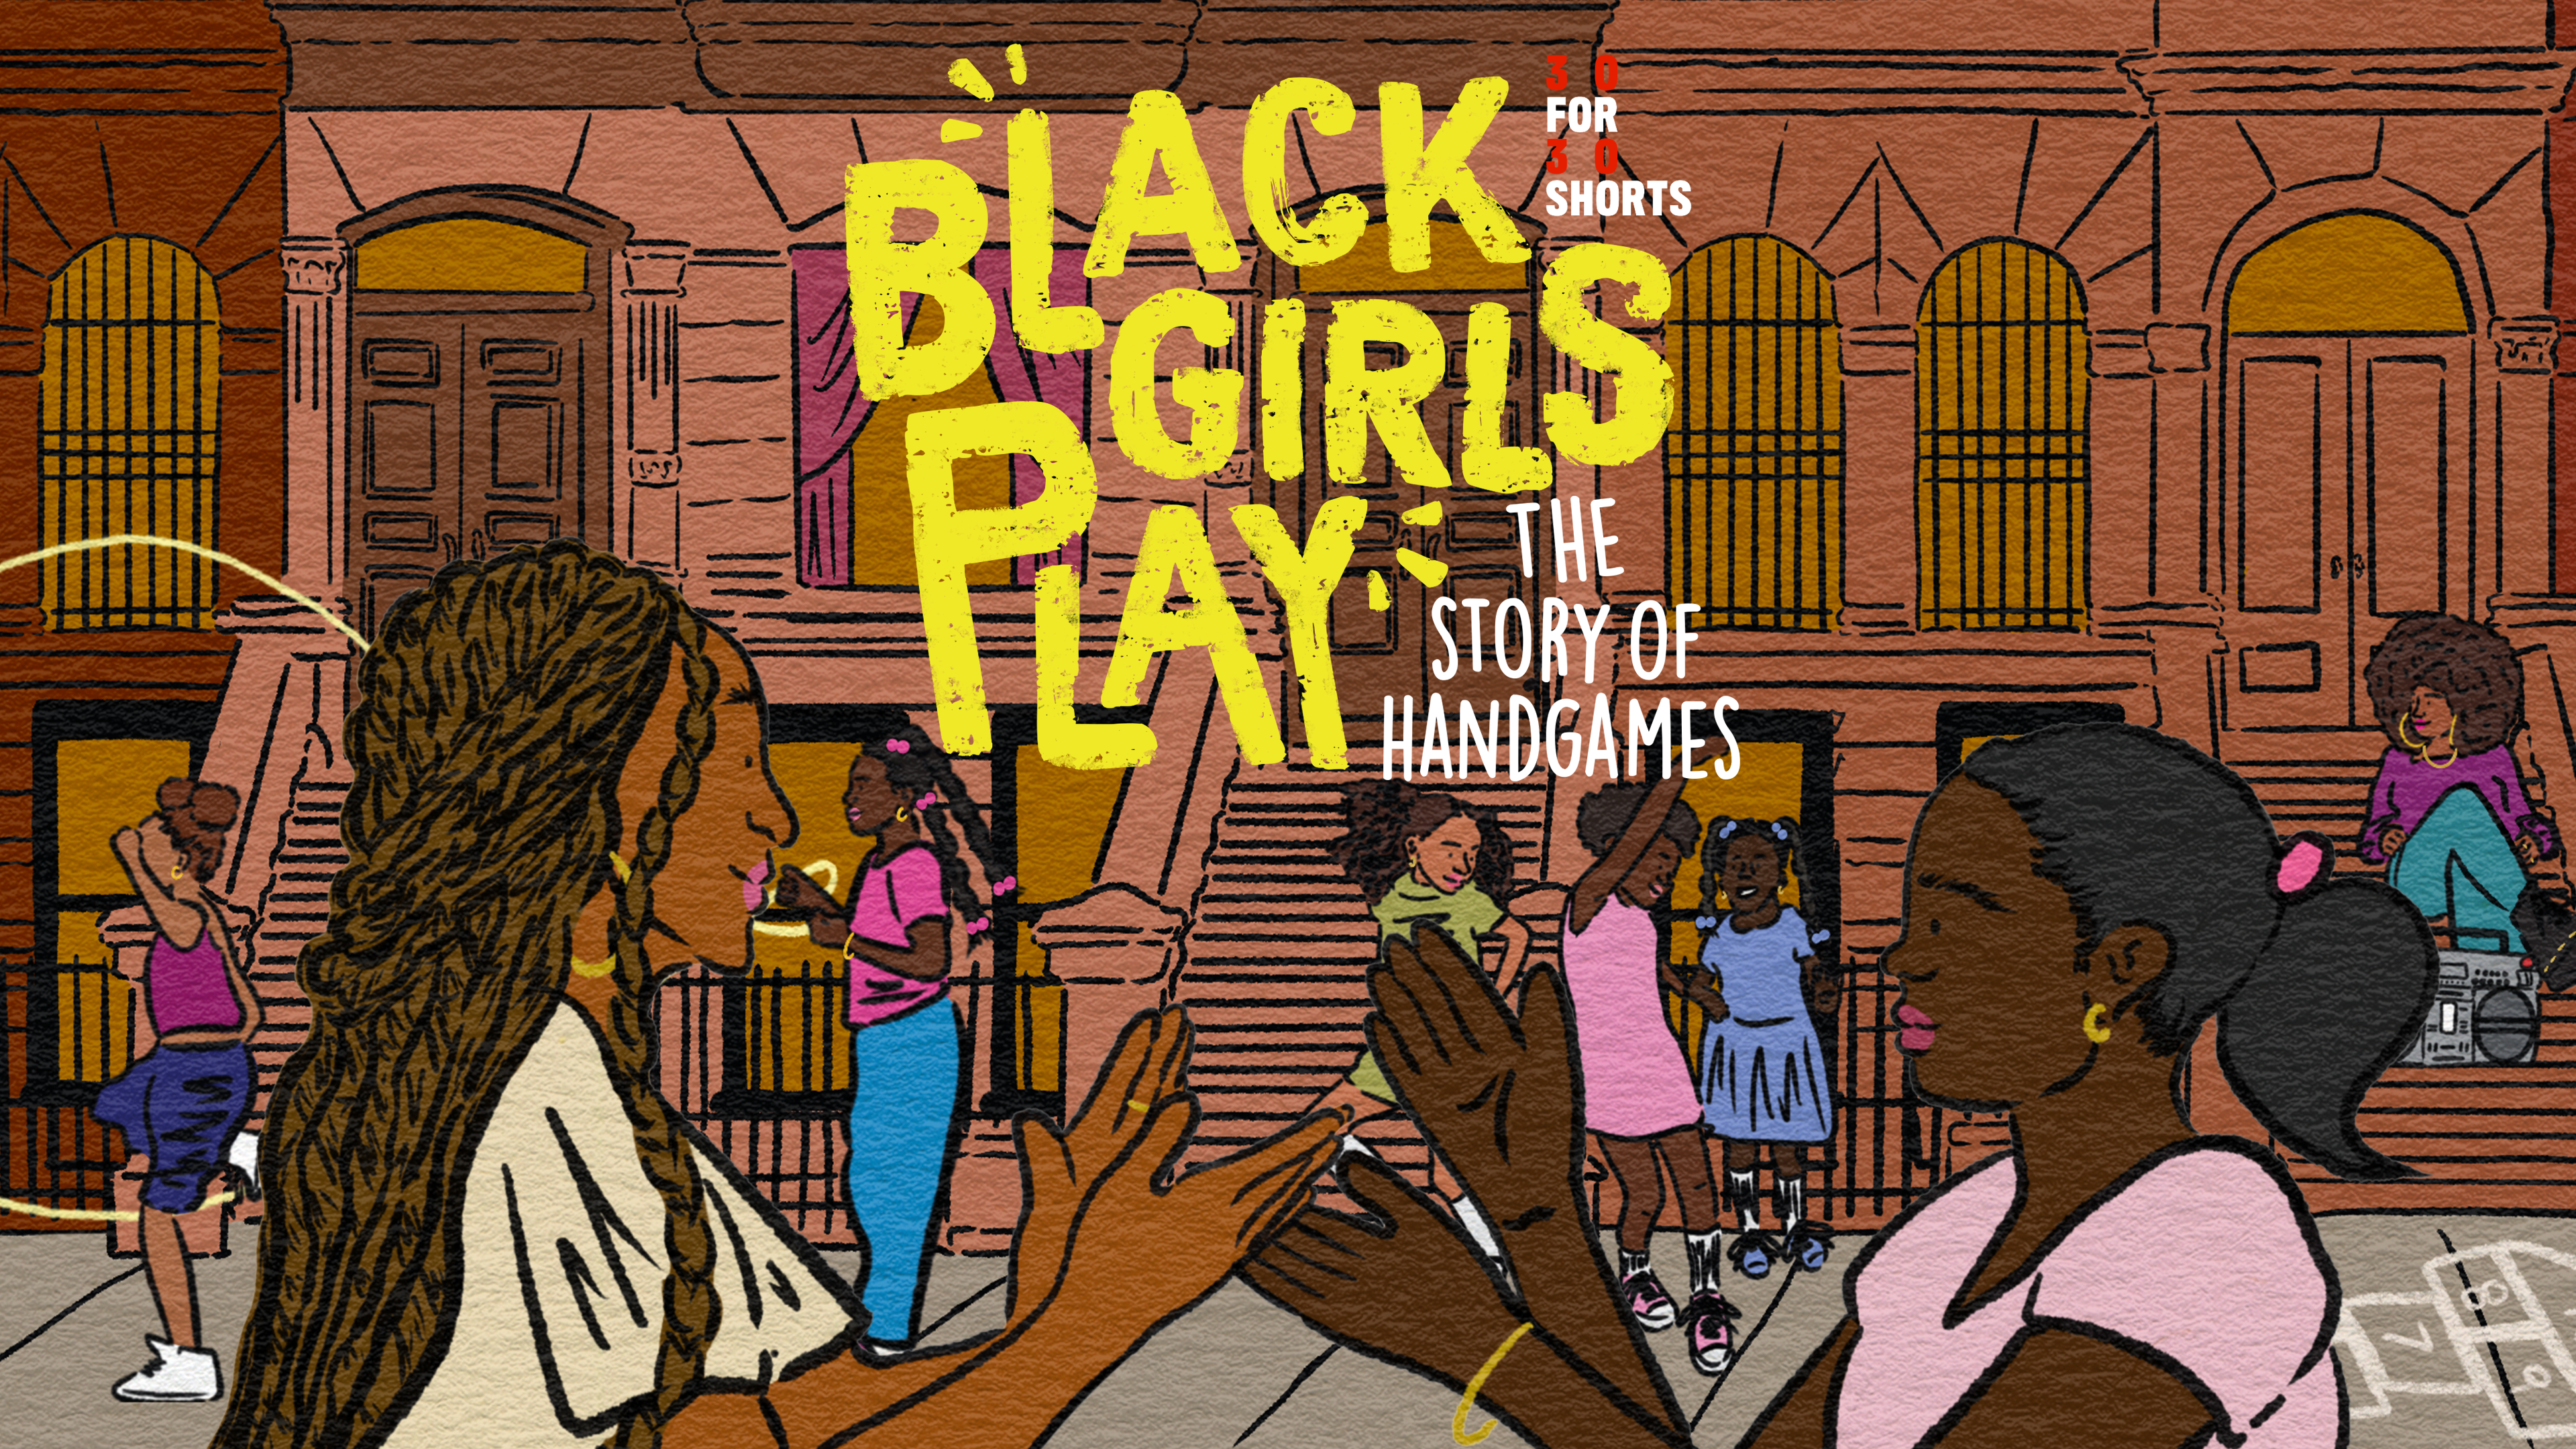 film poster with handdrawn characters and colorful words "Black Girls Play" 